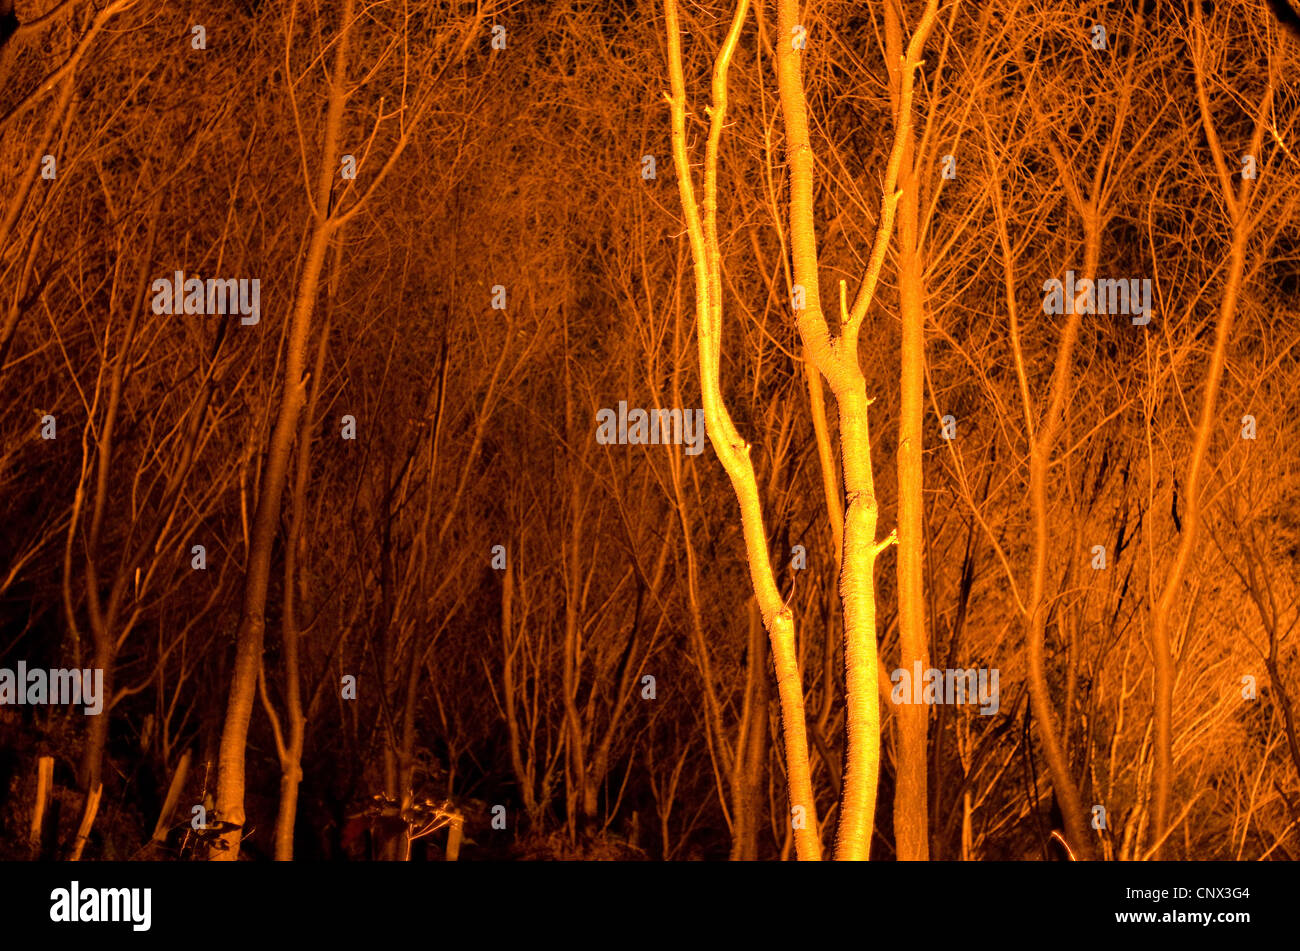 Tree stems at night in artificial light Stock Photo